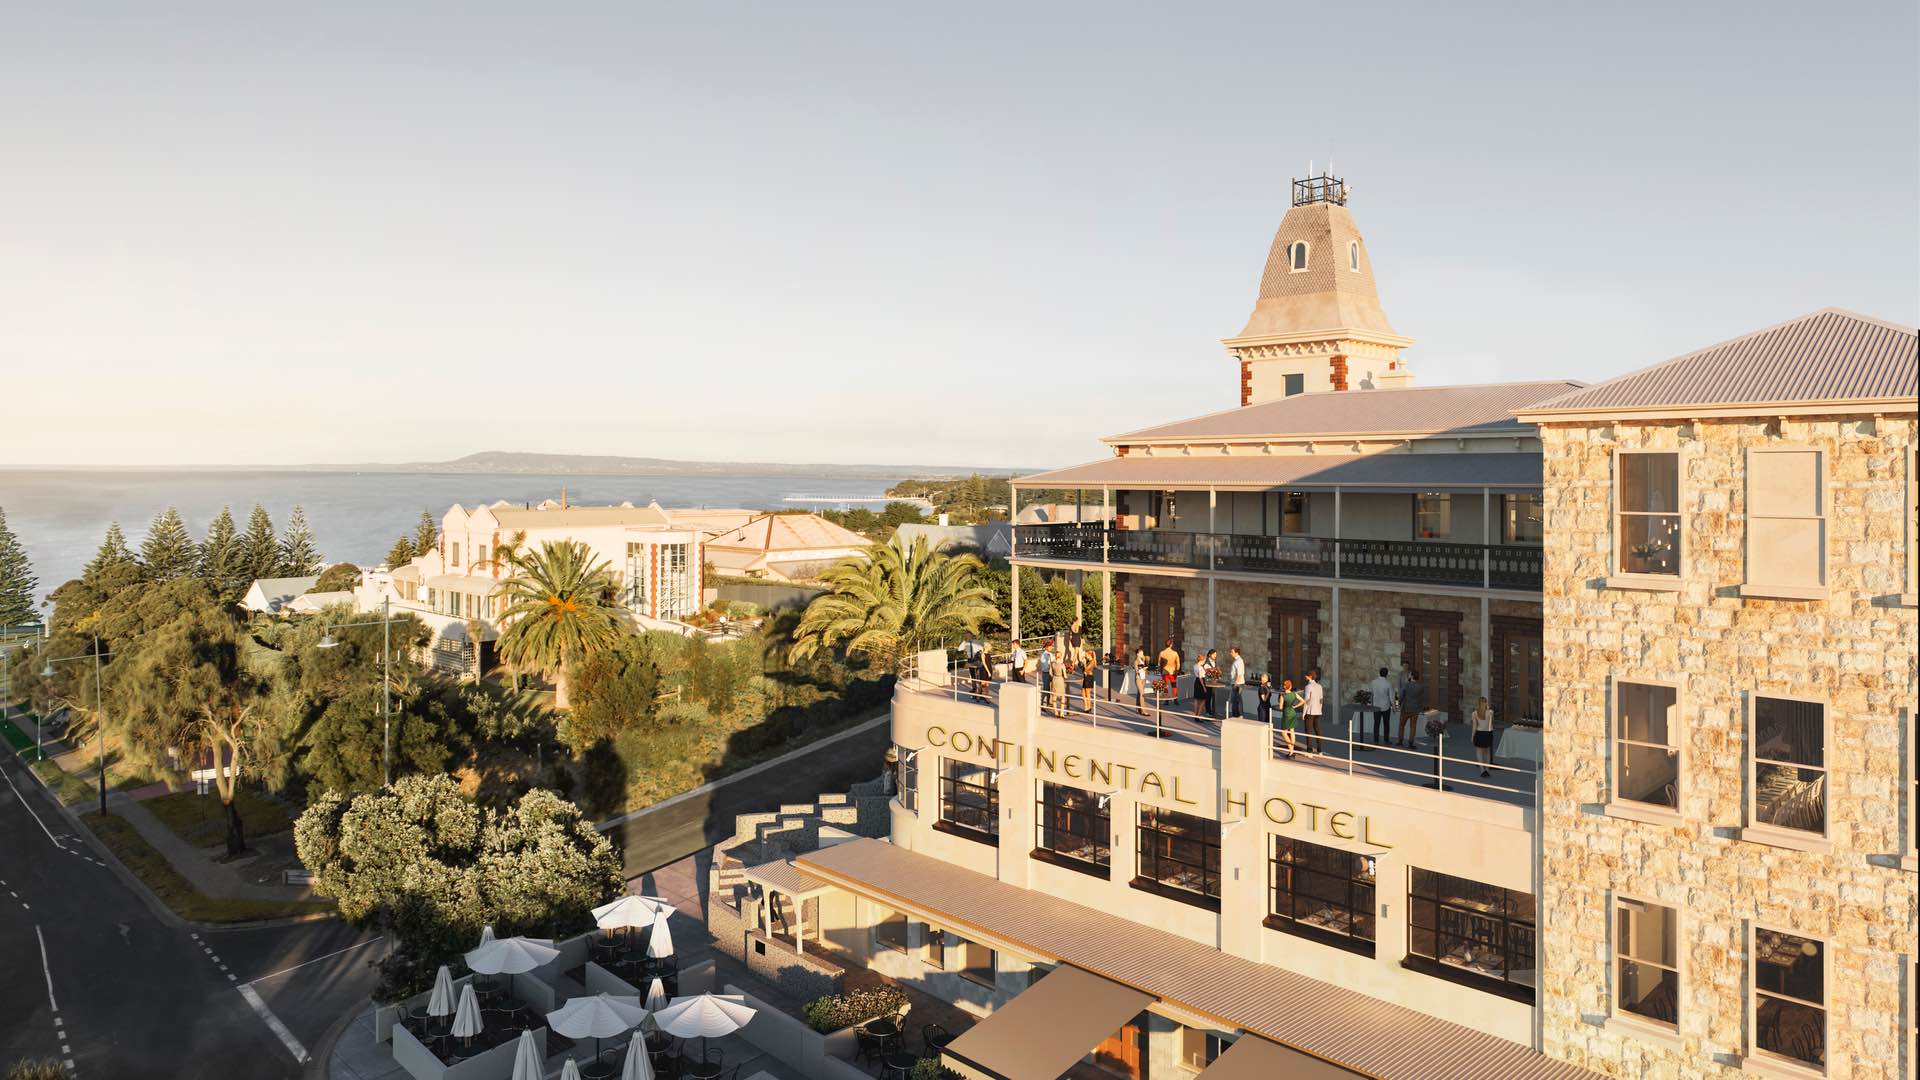 Sorrento's Historic Continental Hotel Is Set to Be Reborn as a Luxe Restaurant, Wellness Centre and Hotel